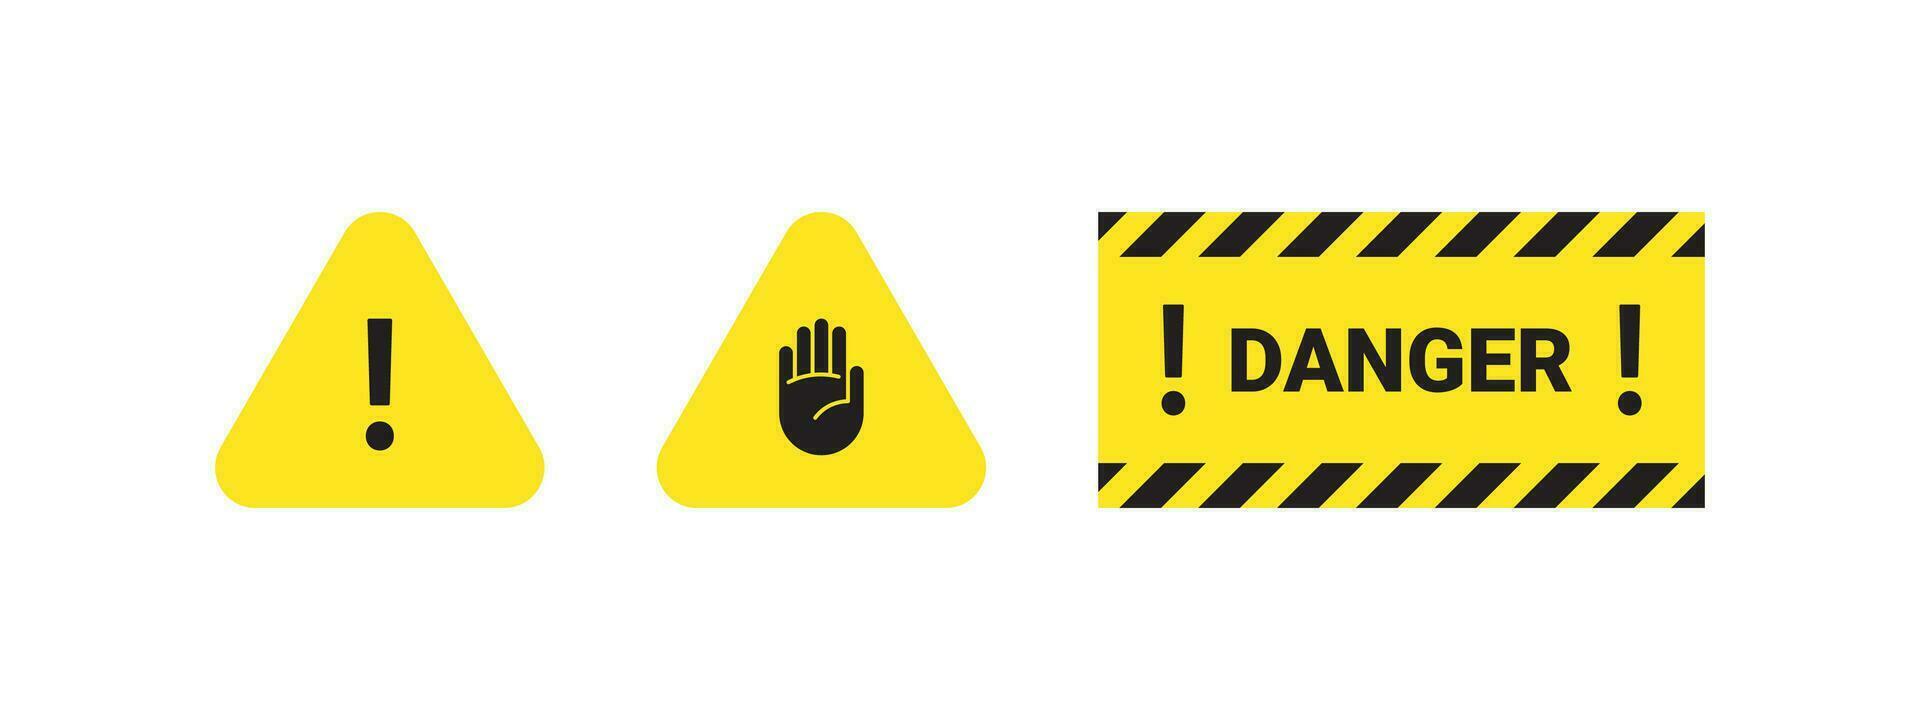 Danger badges. Prohibition signs. Notice danger icons. Vector scalable graphics